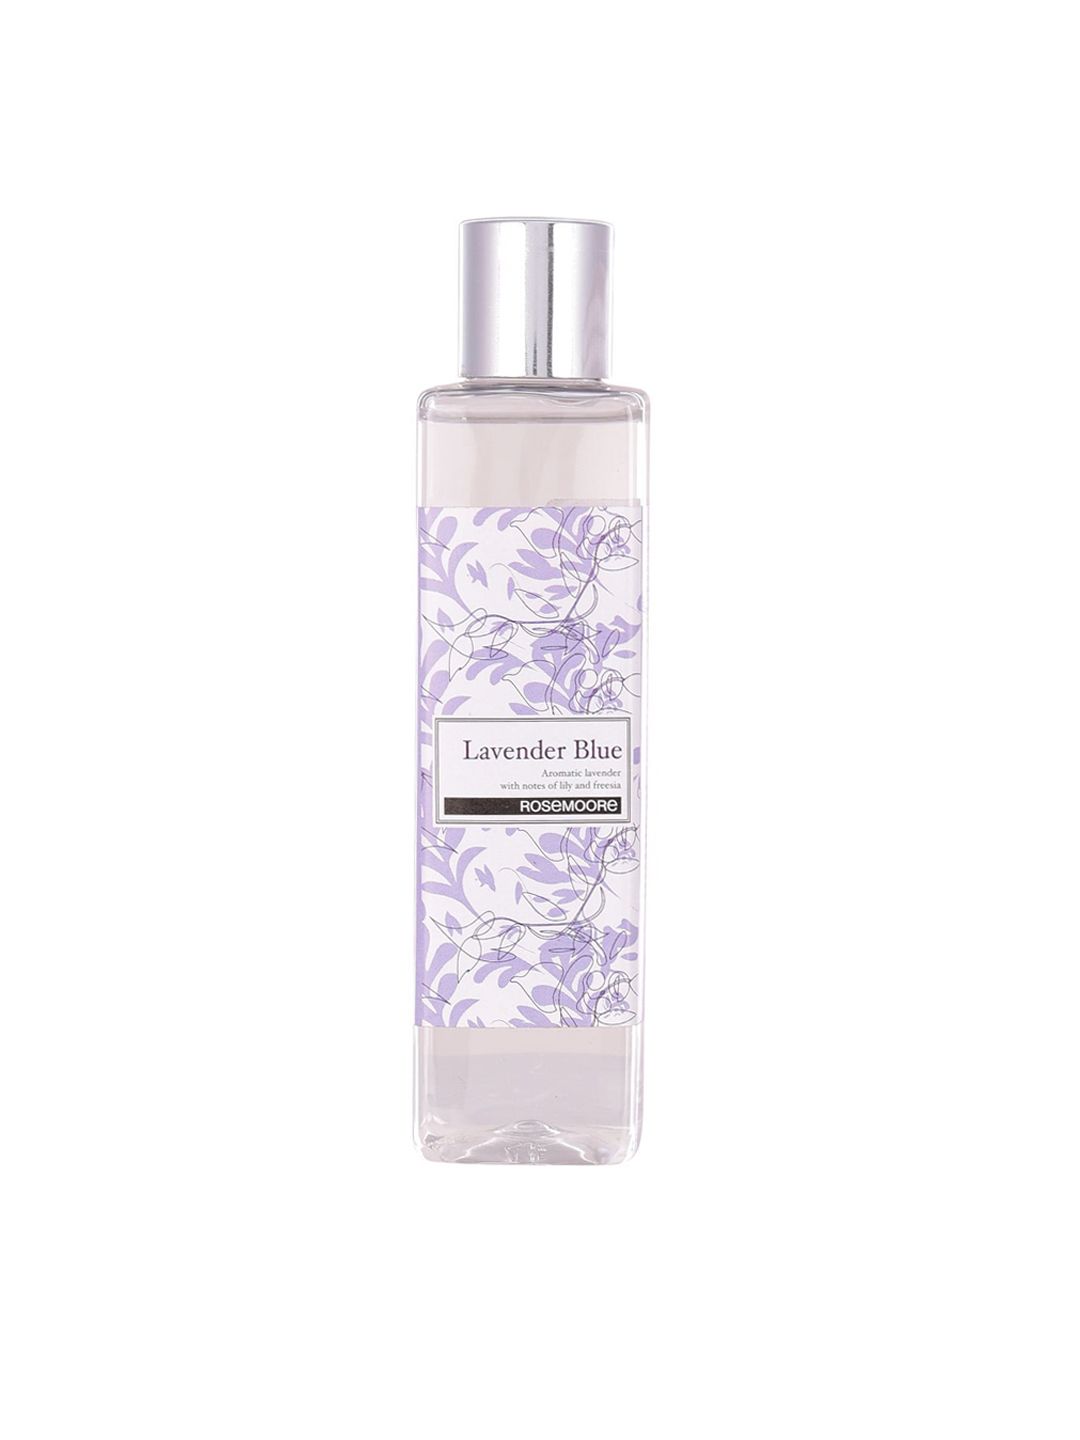 ROSEMOORe Lavendar Blue Scented Reed Diffuser Refill-200 ml Price in India